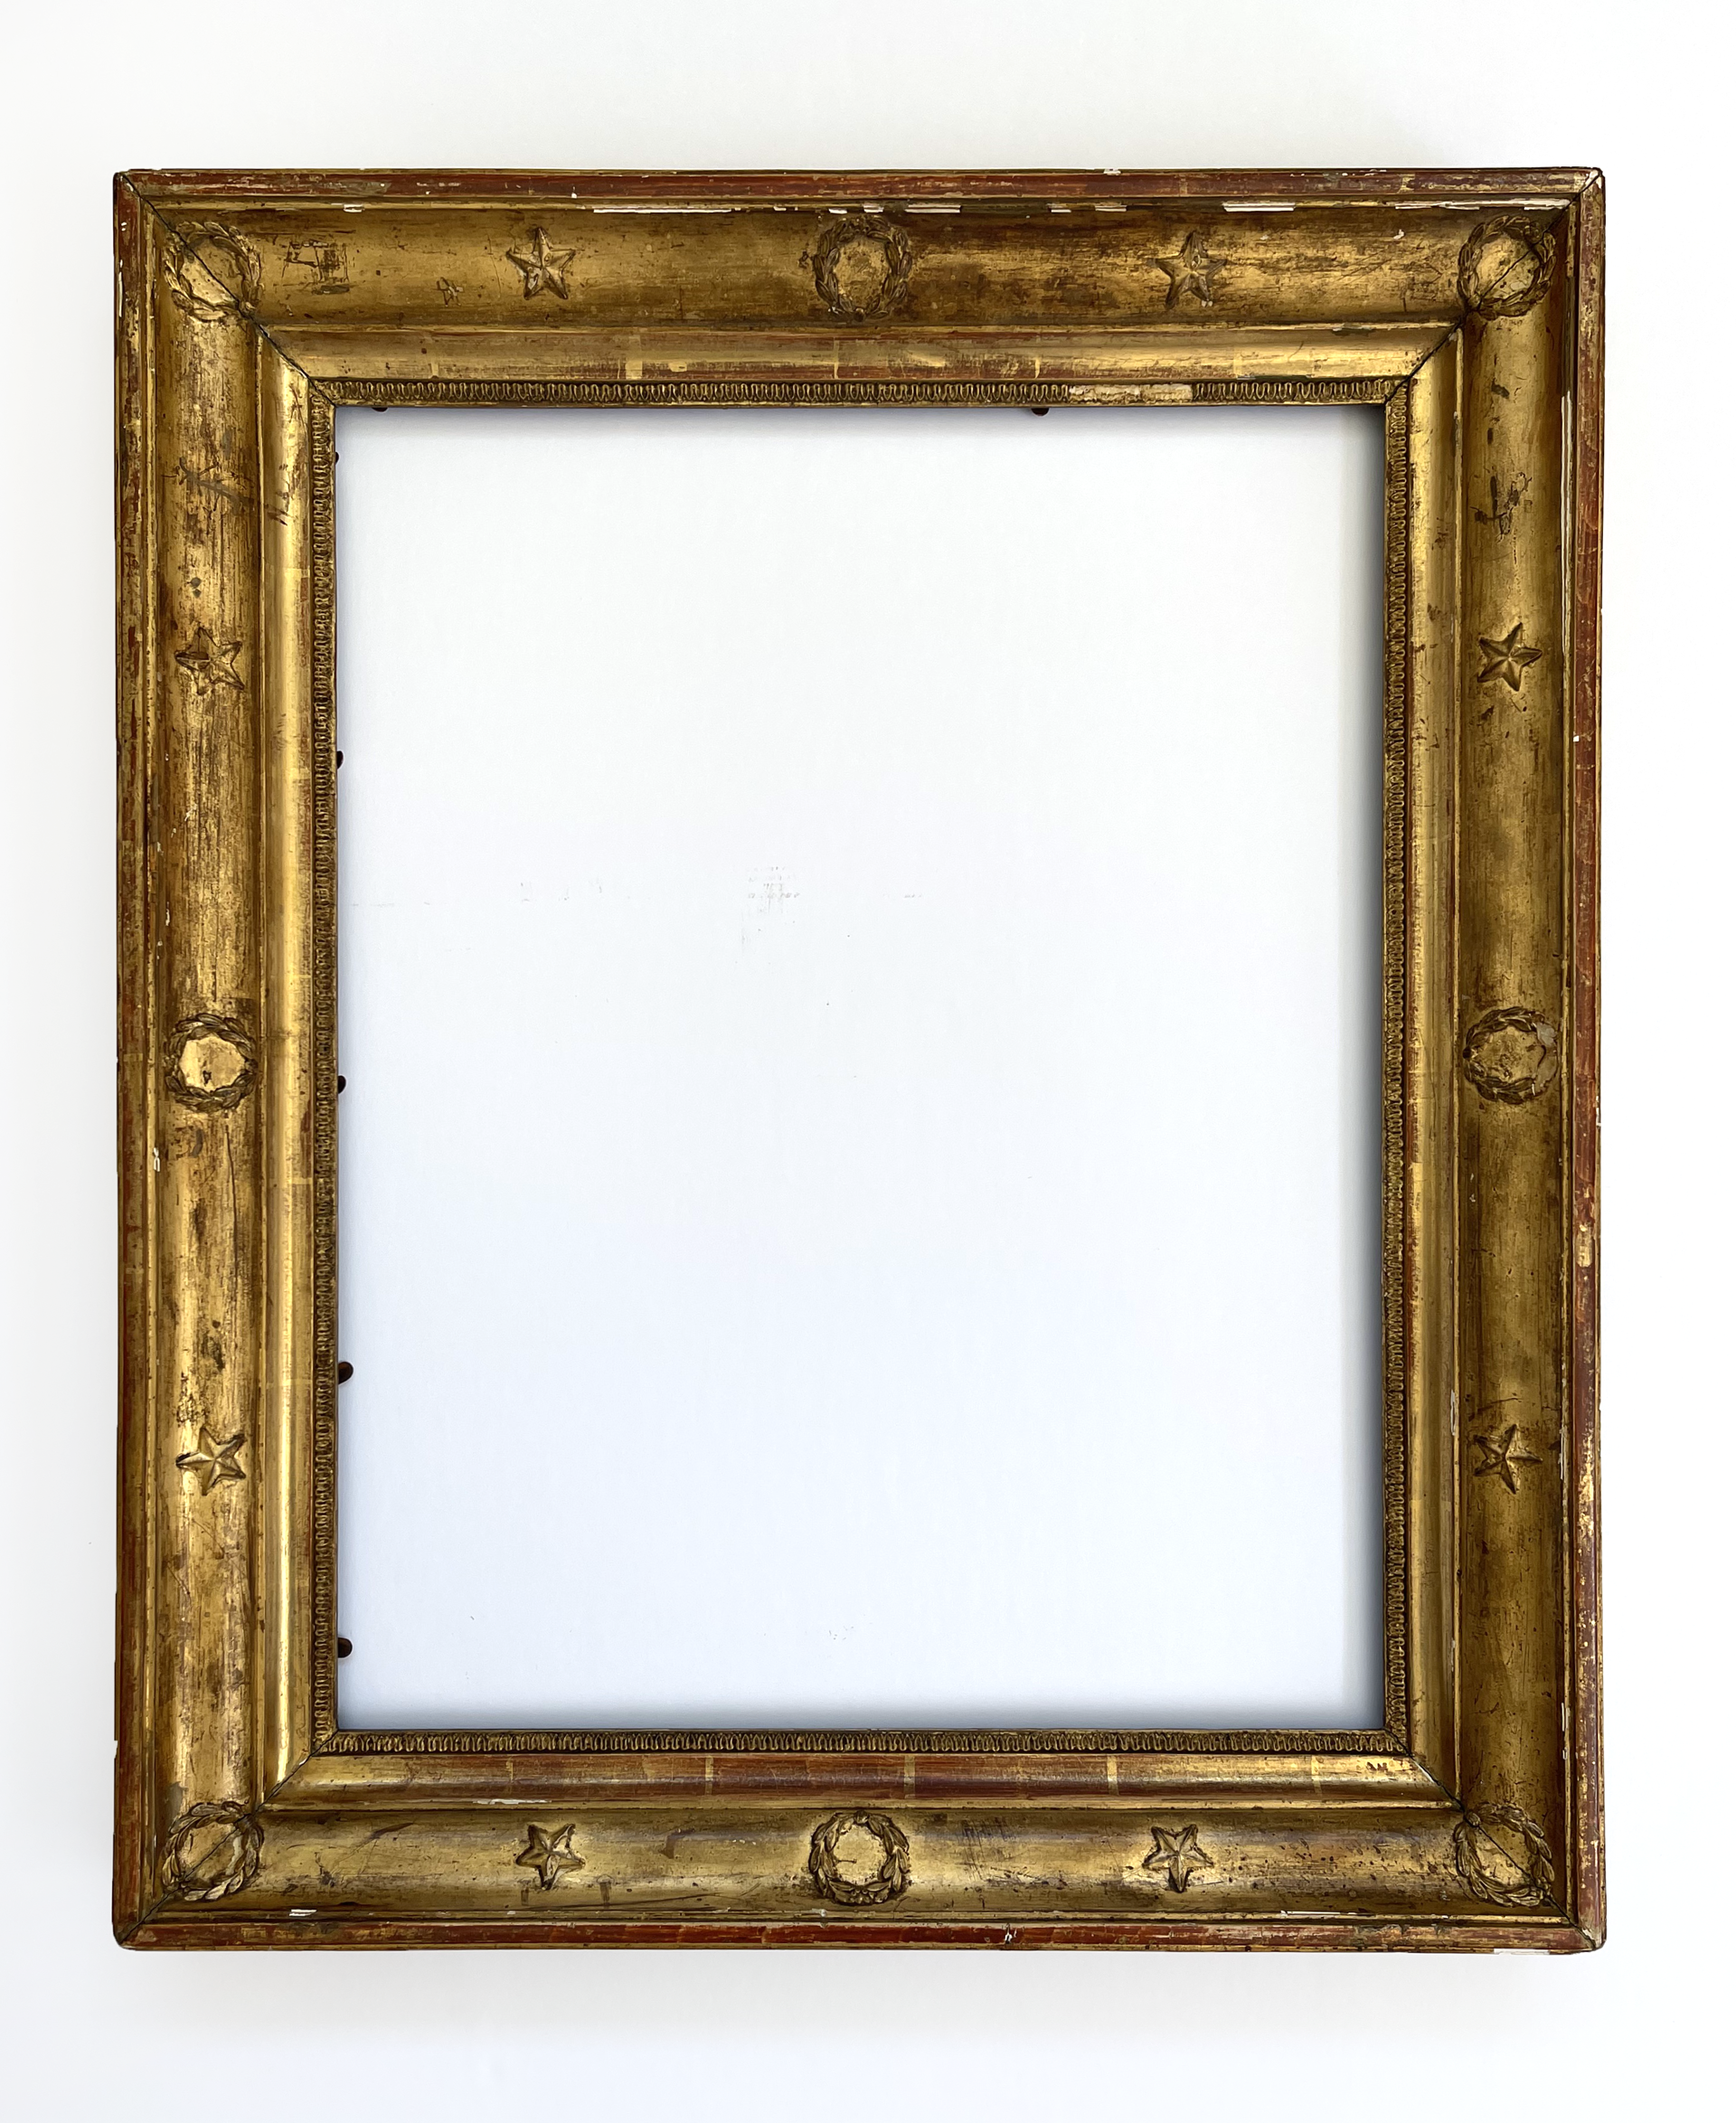 Antique, Gold Gilt, French Frame with Stars and Laurels by Antique Frame